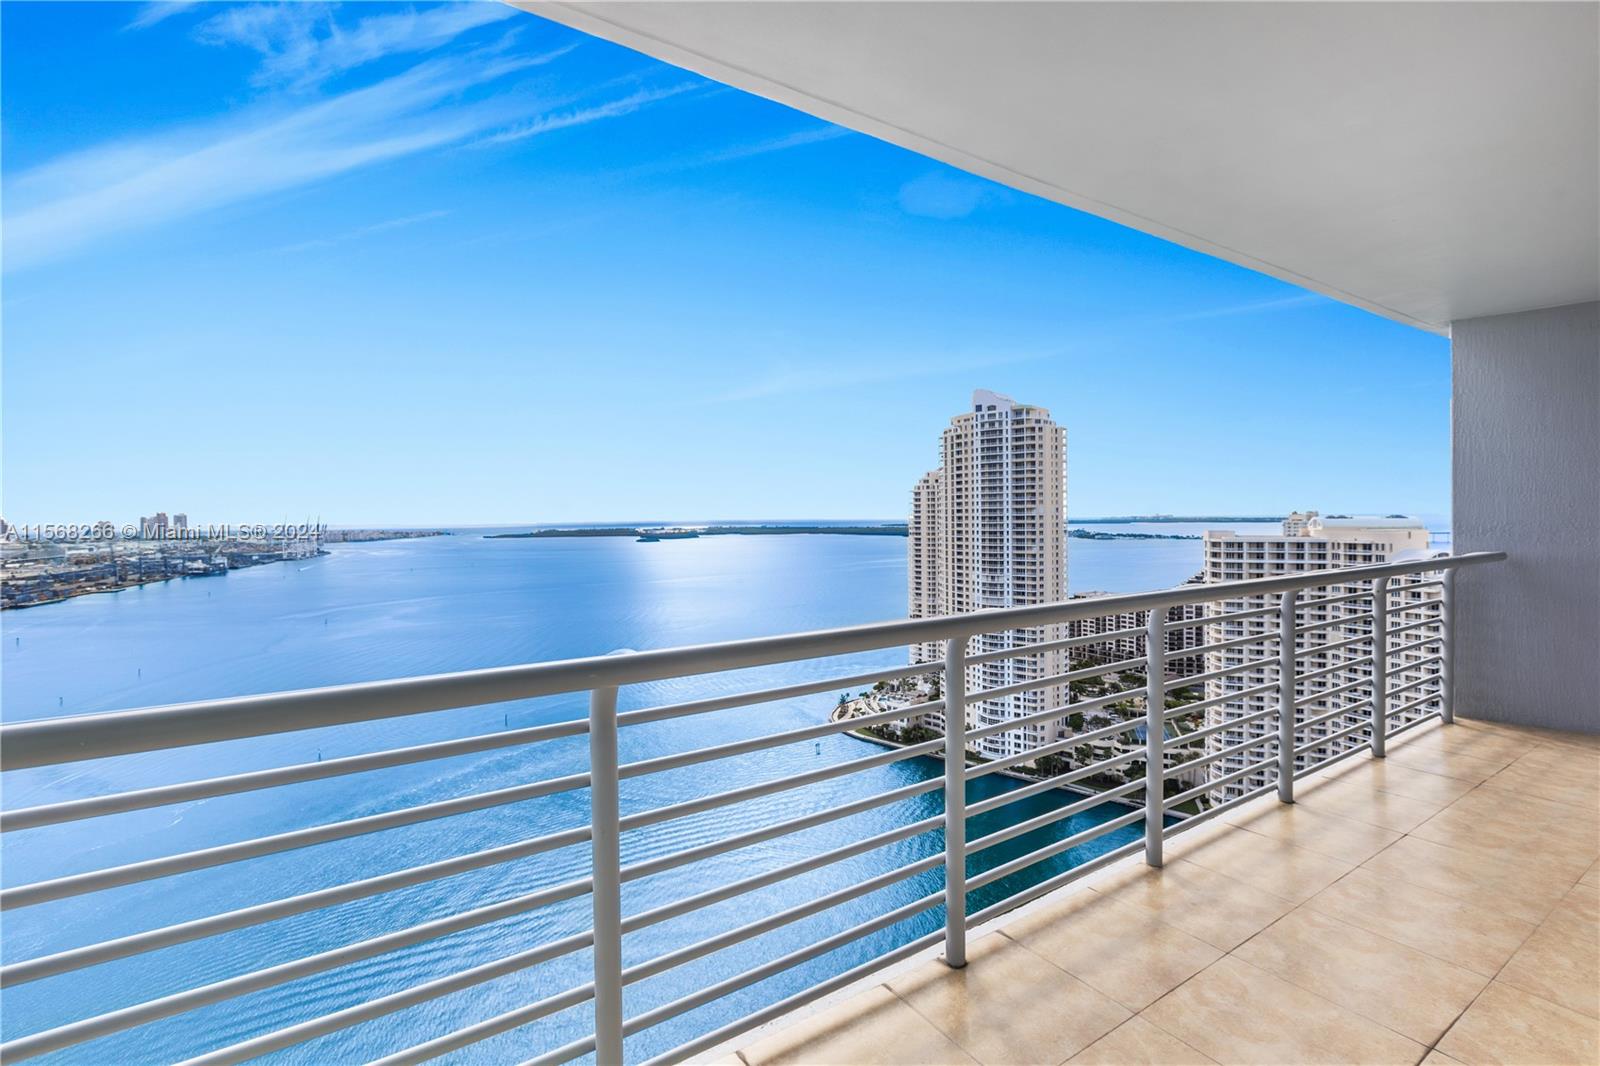 Beautiful 3bdrms 2bths fully furnished condo with direct views of Biscayne Bay. Unit has Italian kitchen cabinets.
with stainless steel appliances and granite counter-tops and marble bath tops. Bldg amenities incl: 2 swimming
pools, Jacuzzi, 2 fitness centers, 2 party rooms, conf. rm., convenience store, and 24 hrs security, valet, and
concierge. Centrally located within minutes to SoBe, Gables, Grove, and Airport. New appliances, full size clothes
washer and dryer and new a/c with floors are a high-end veneer thickness made by Parkay